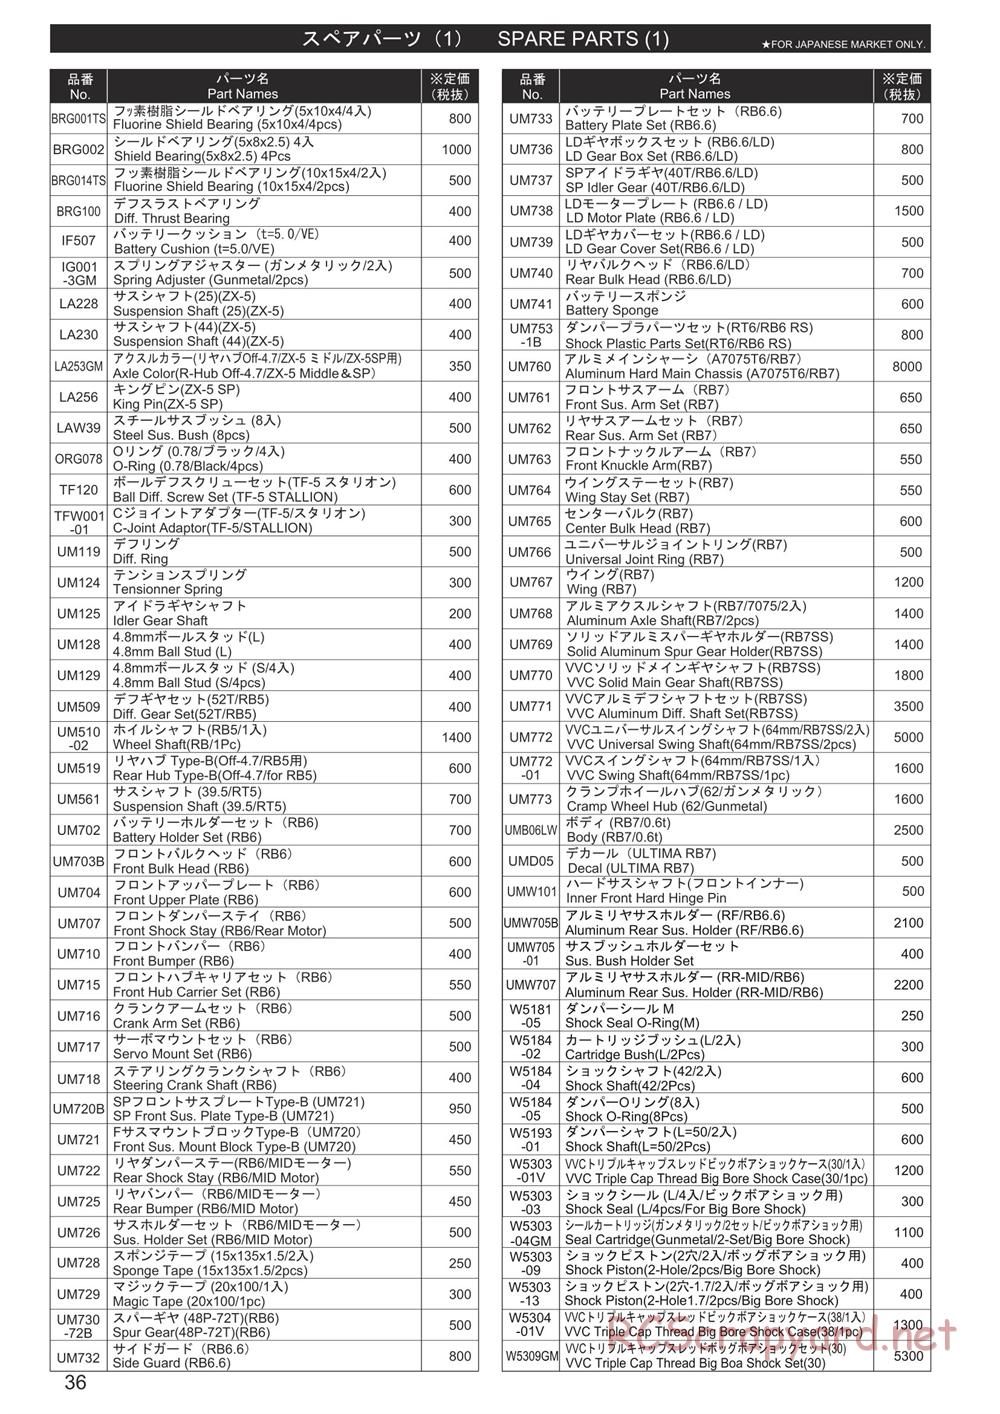 Kyosho - Ultima RB7SS - Parts List - Page 1